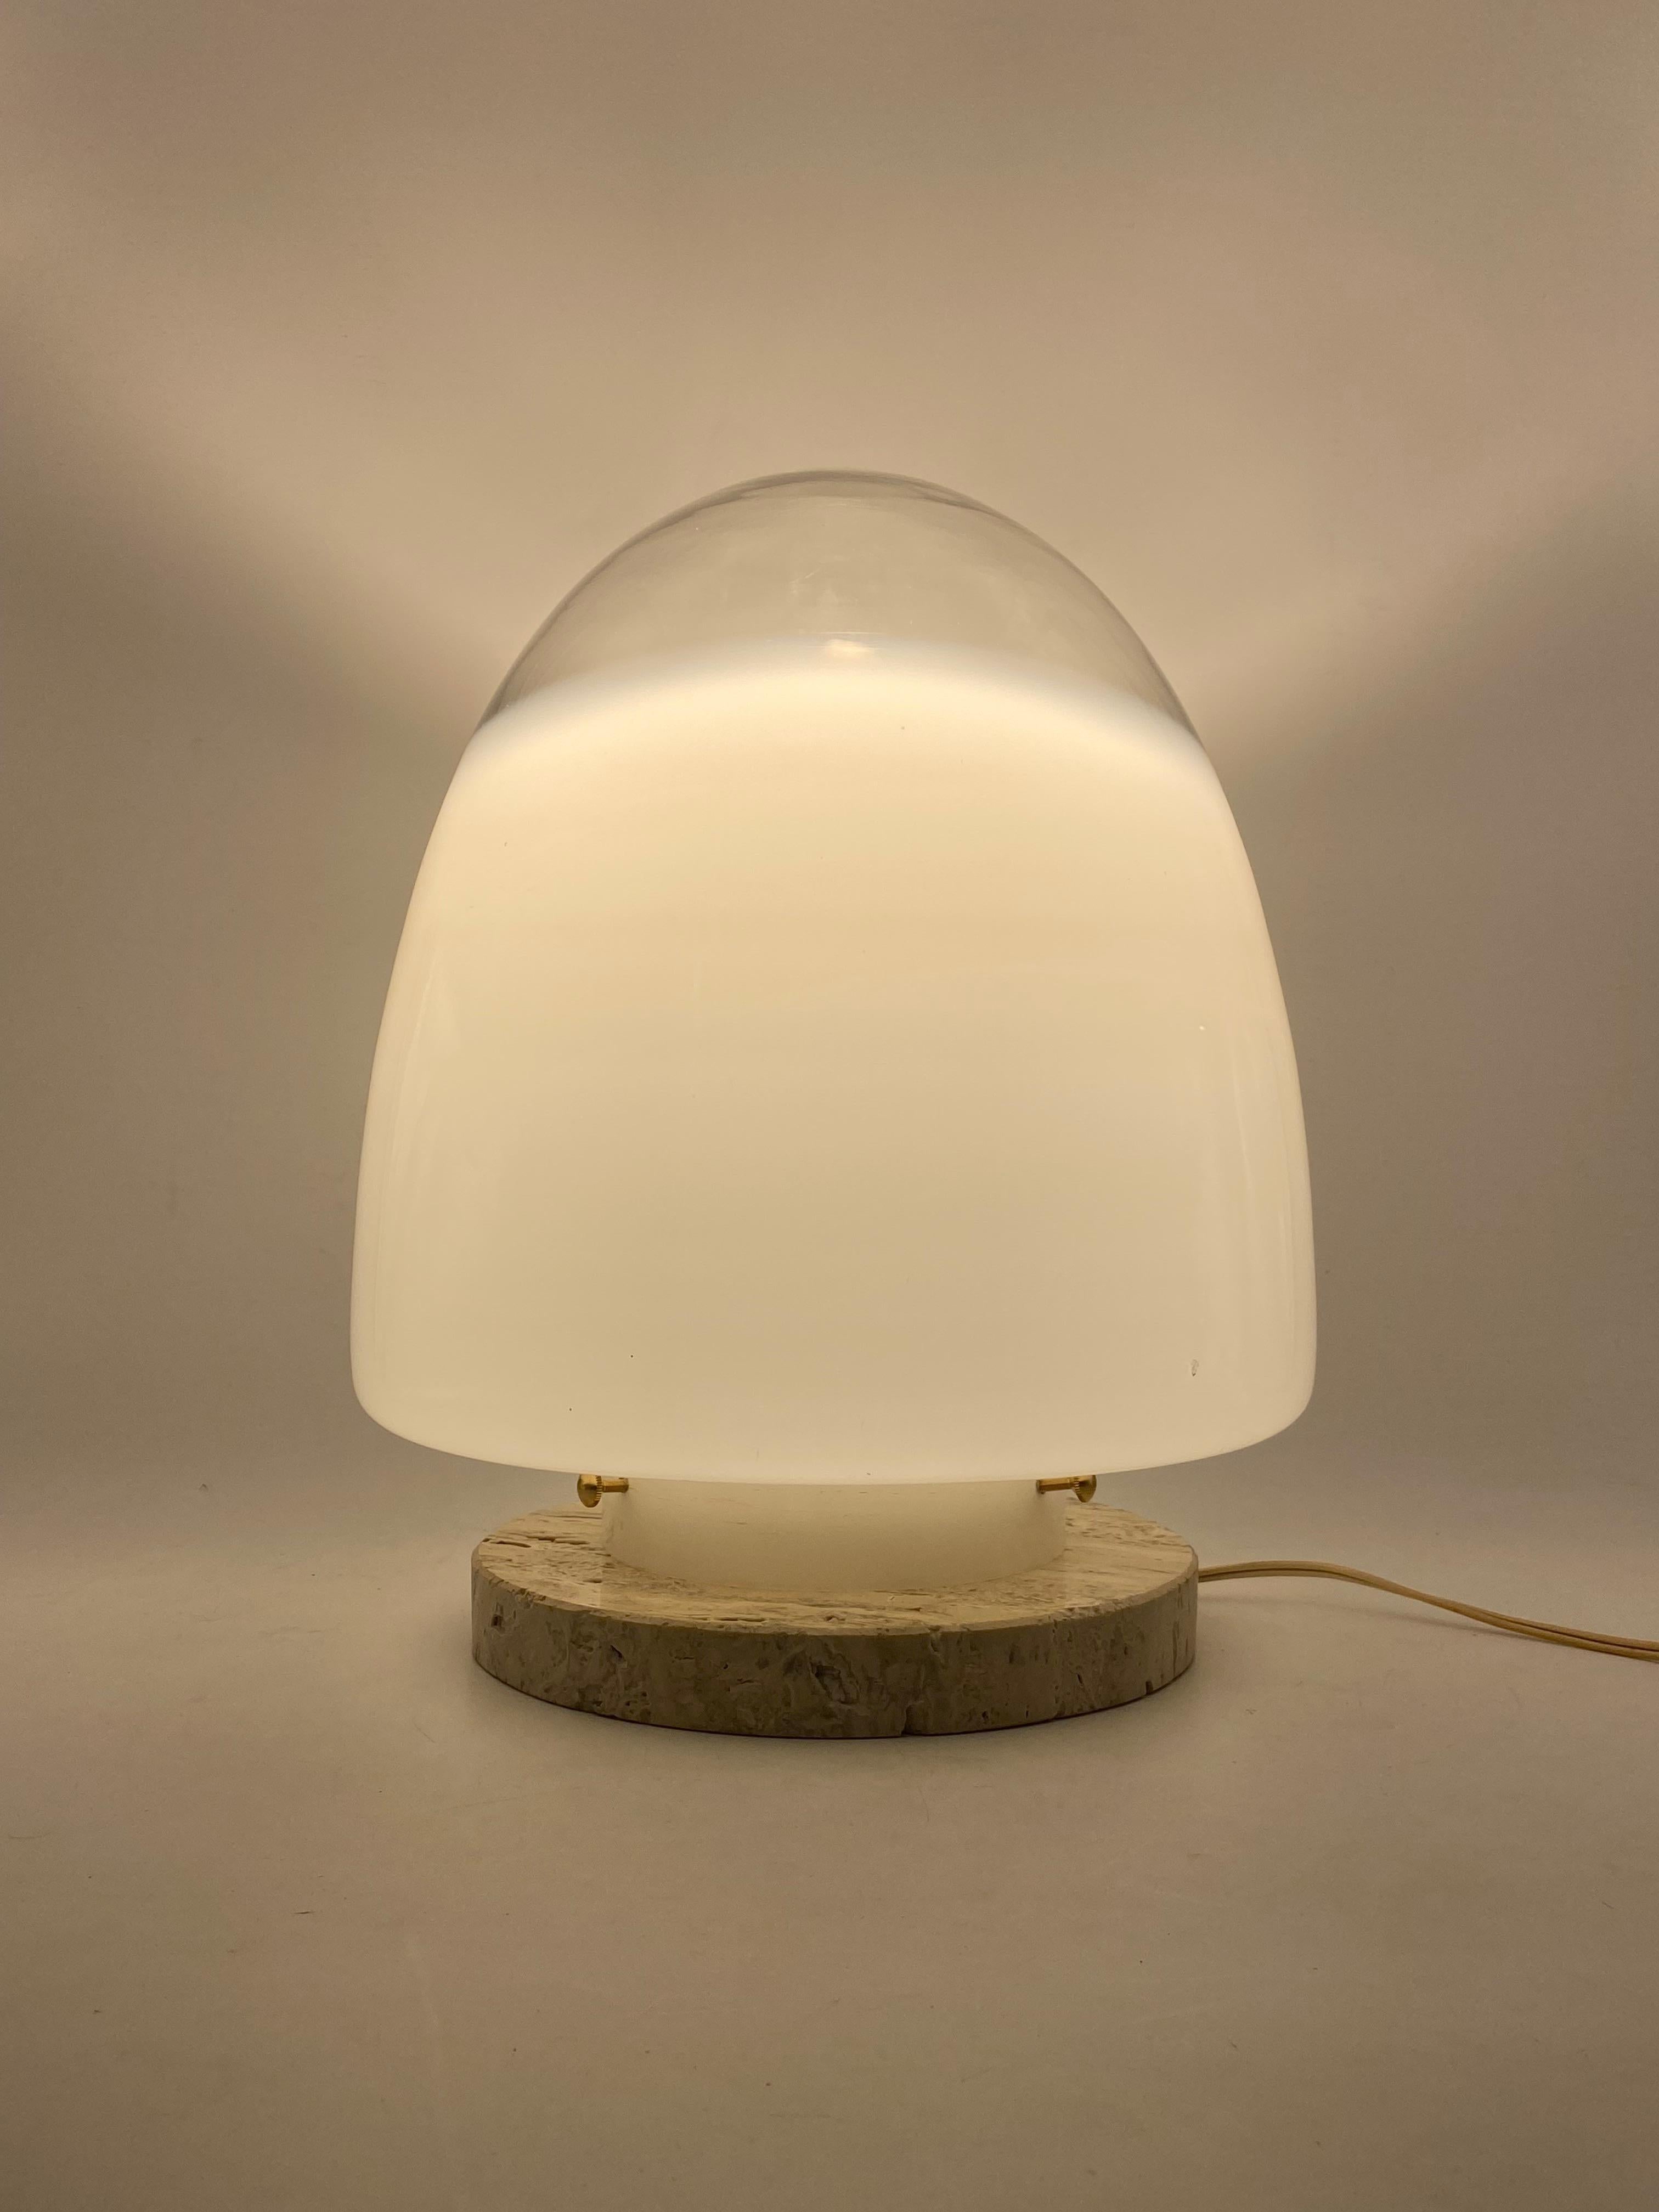 Giusto Toso Murano Art Glass and Travertine Table Lamp, Leucos, Italy, 1970s For Sale 7